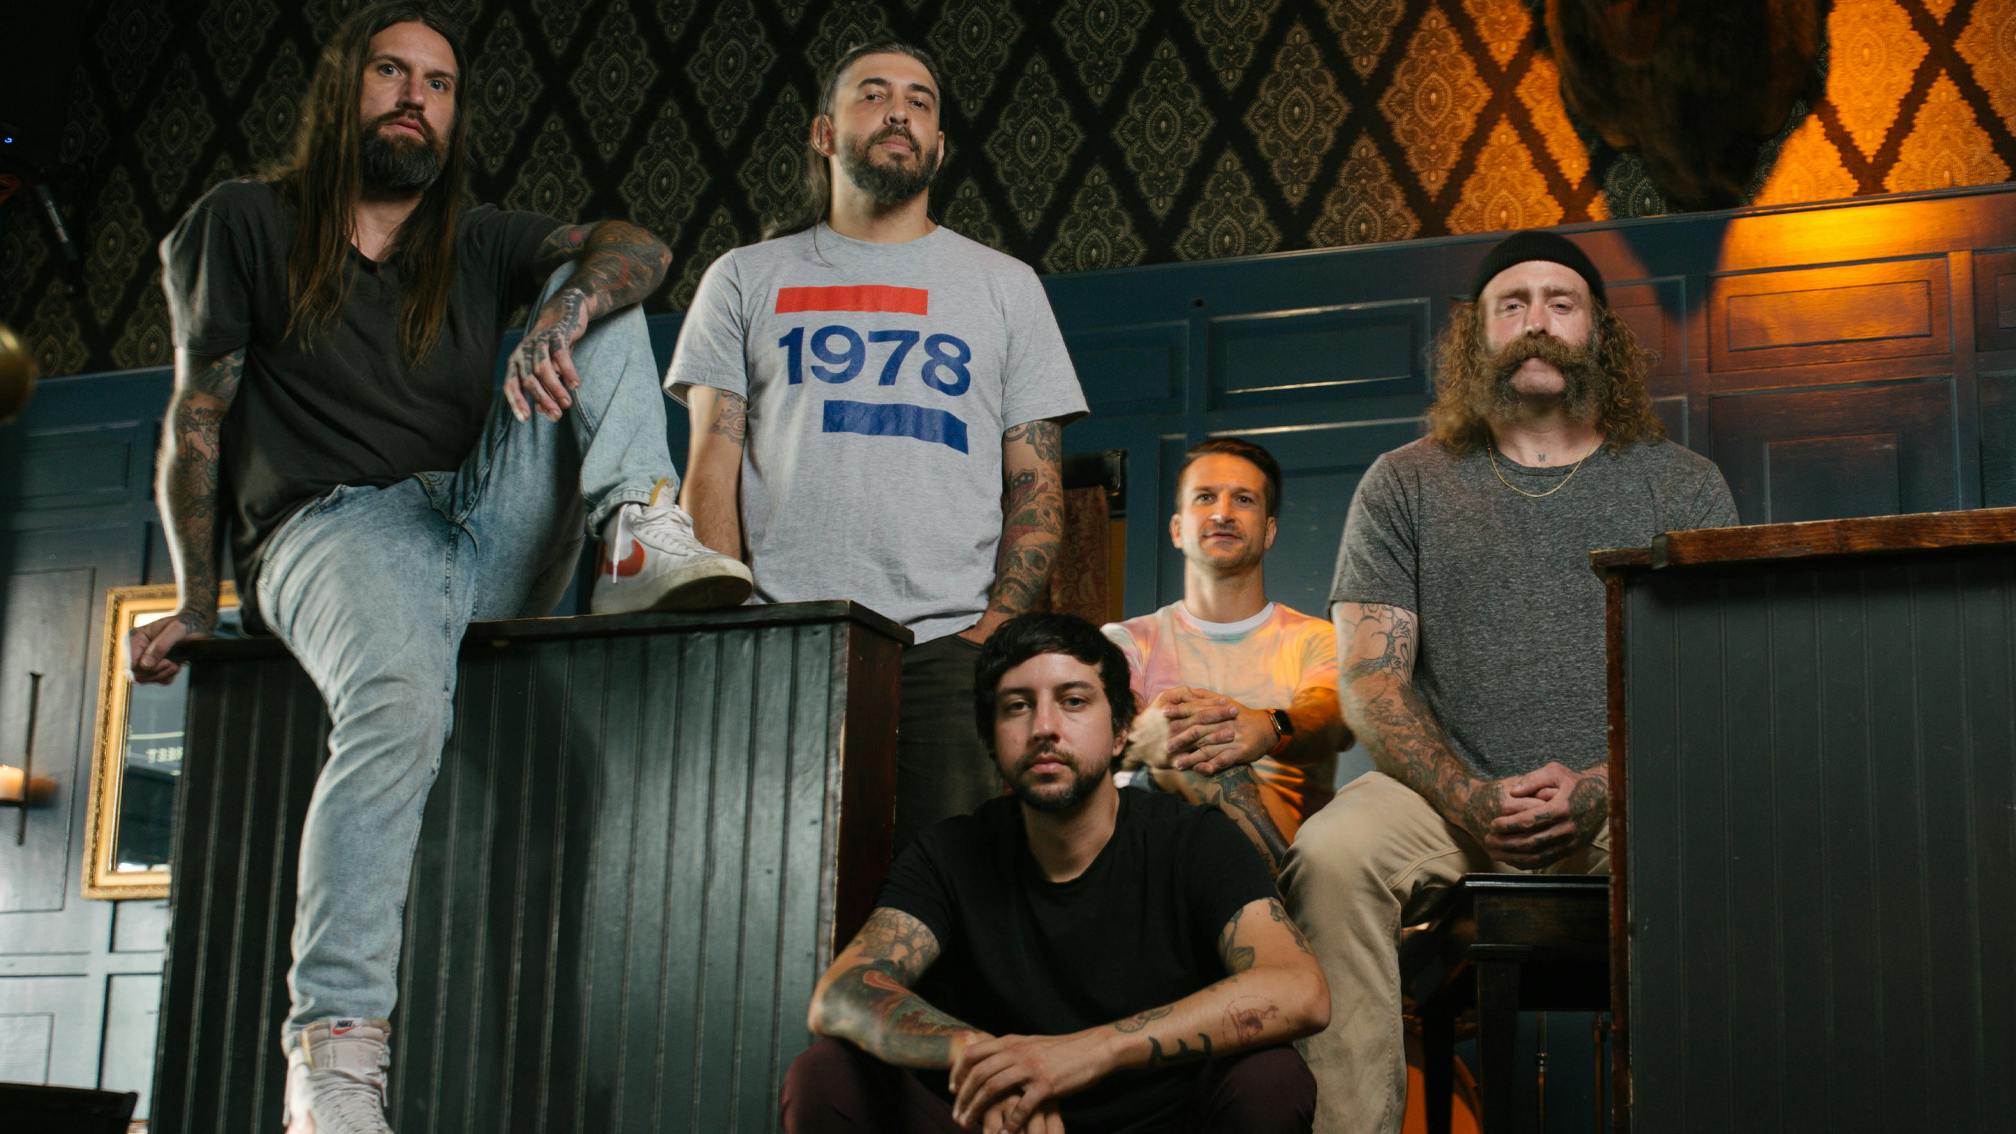 Every Time I Die announce ninth album Radical; drop new song Post-Boredom